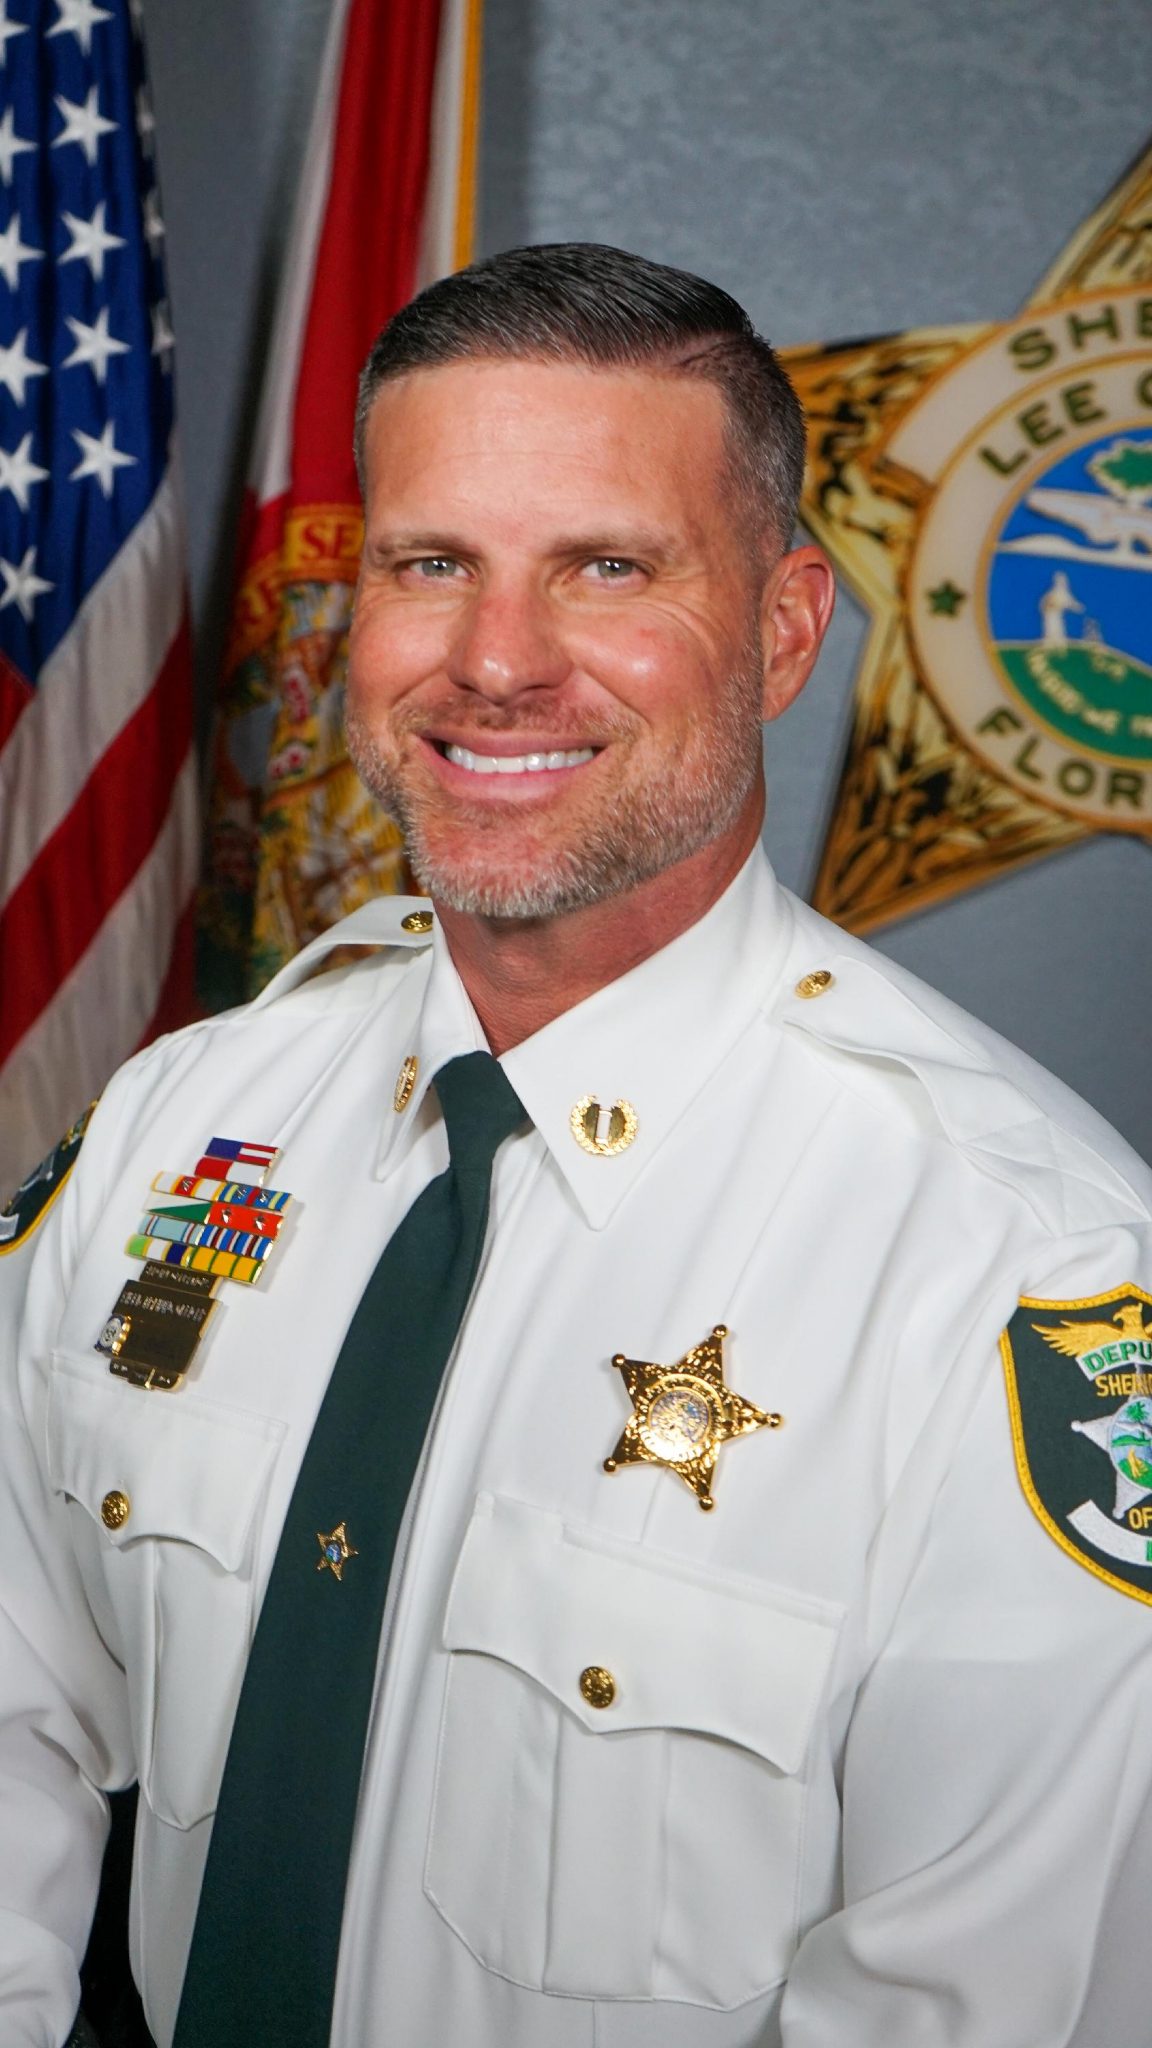 Lee County Sheriff's Office commander arrested for DUI - DUI News Blog